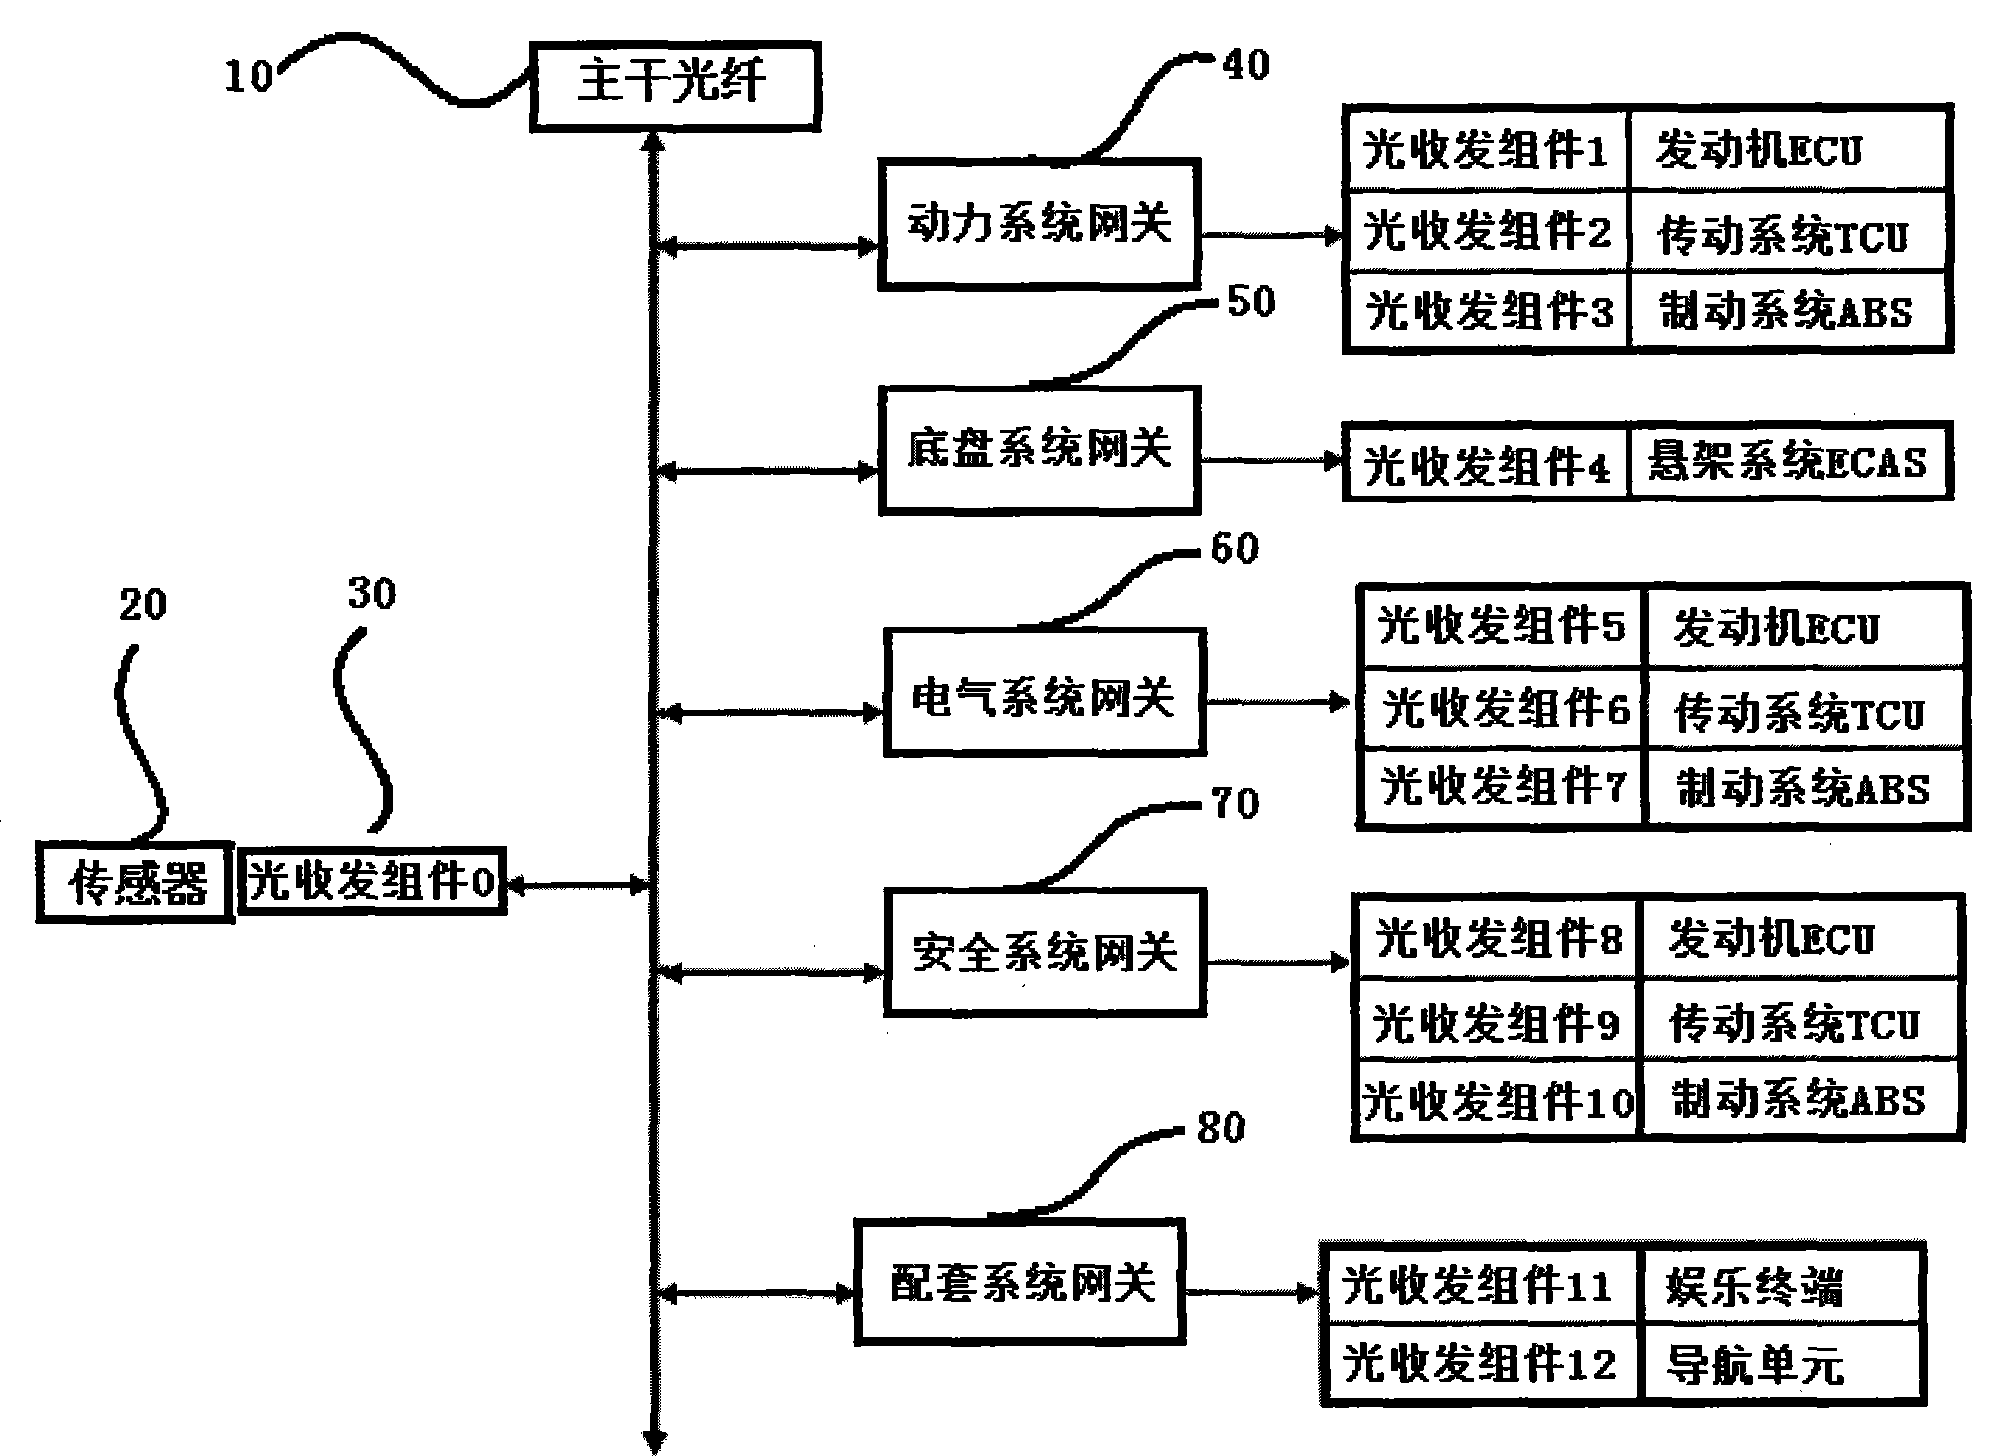 Optical network-based automobile electric system